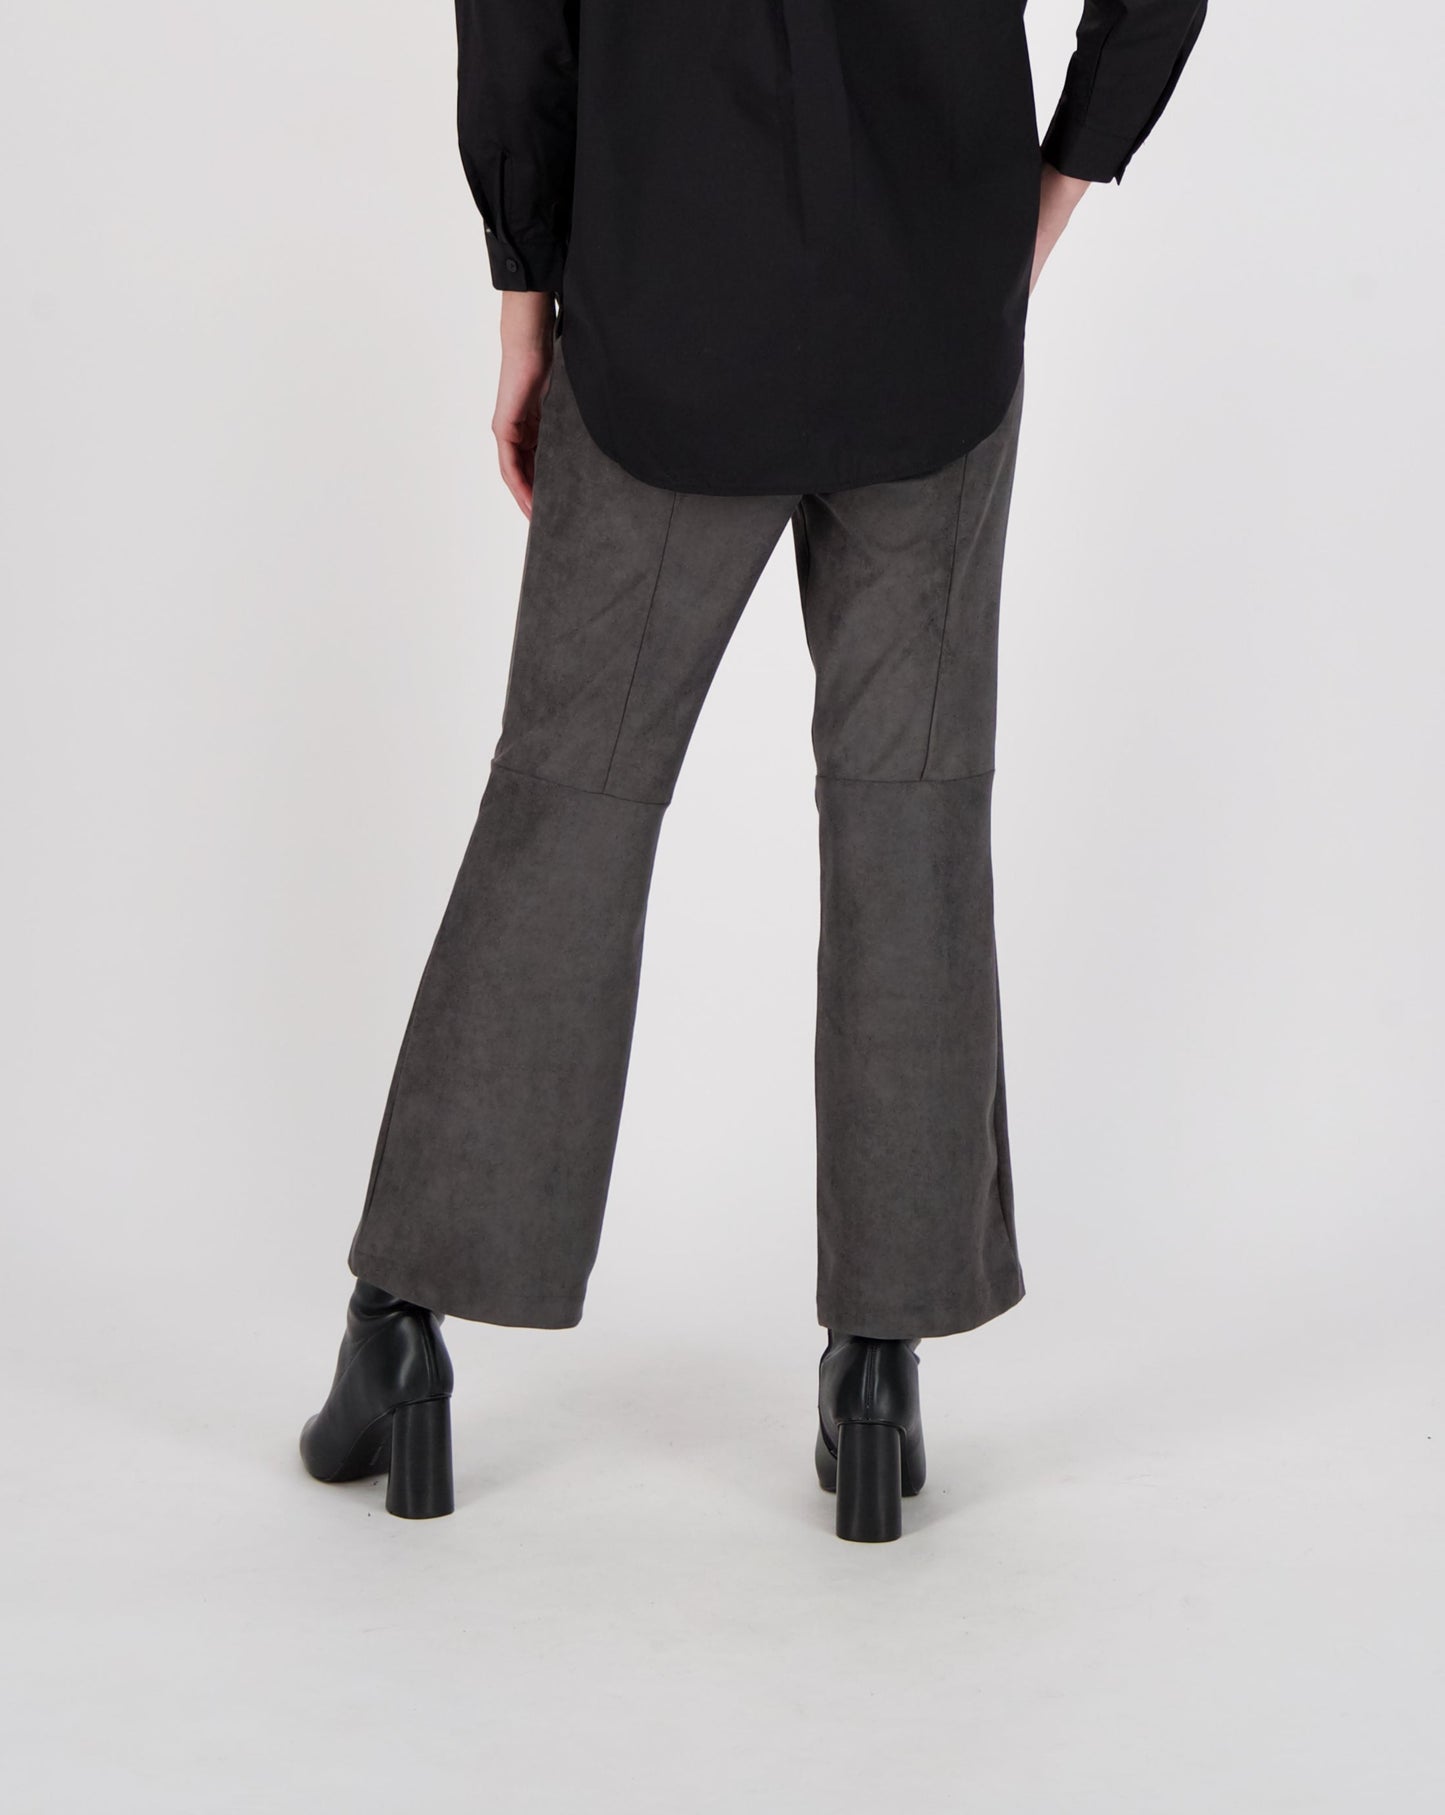 Suede Boot Cut Pant